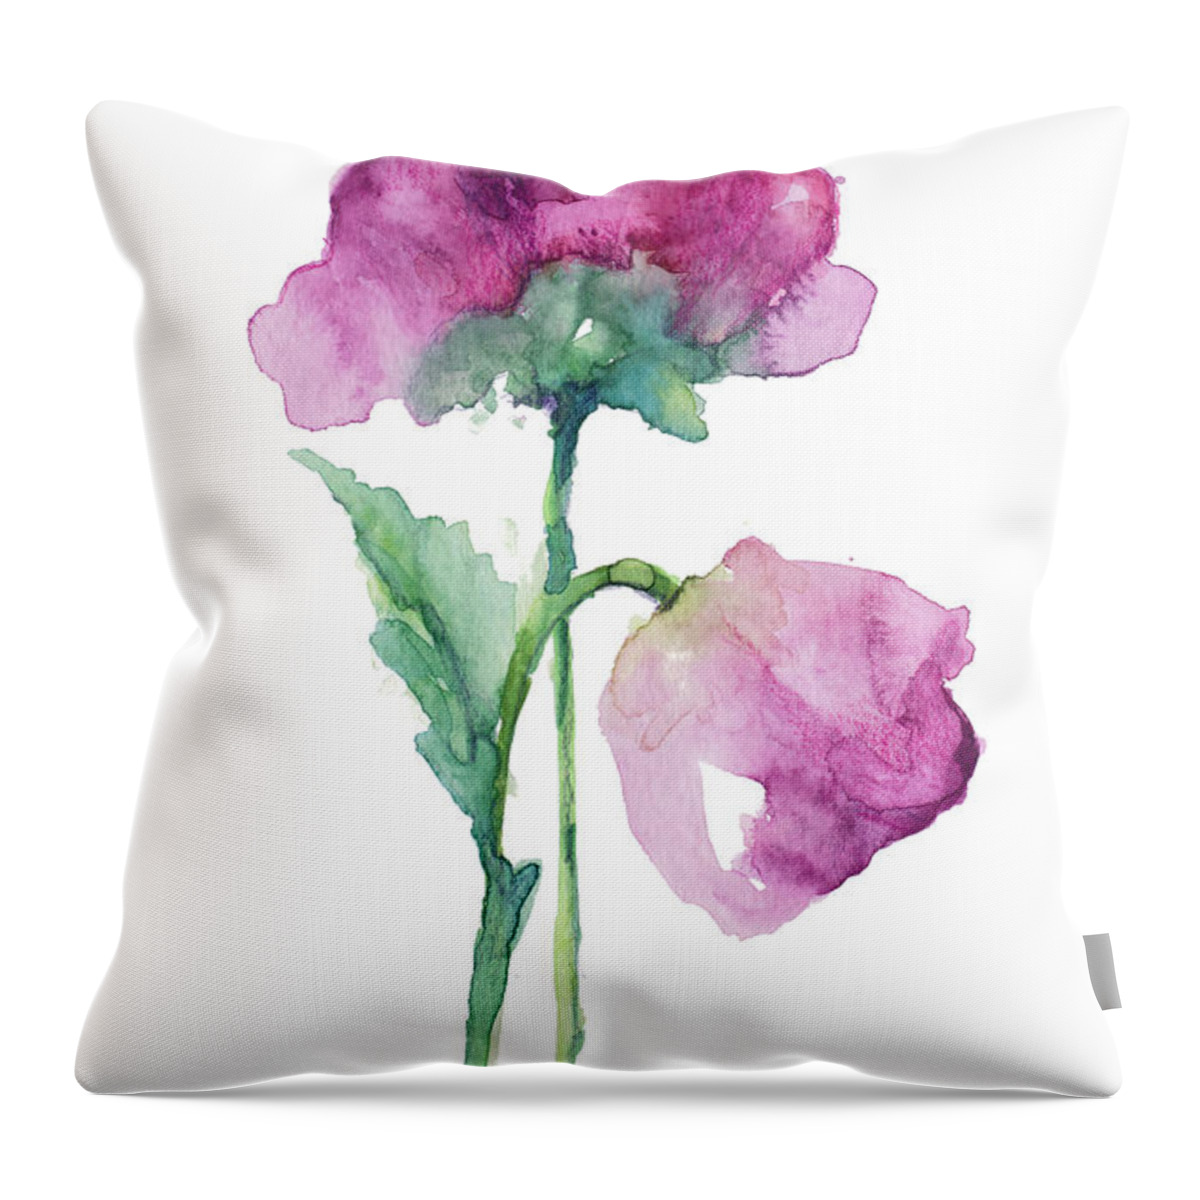 Fuchsia Throw Pillow featuring the painting Fuchsia Tulip And Orchid Bud by Lanie Loreth